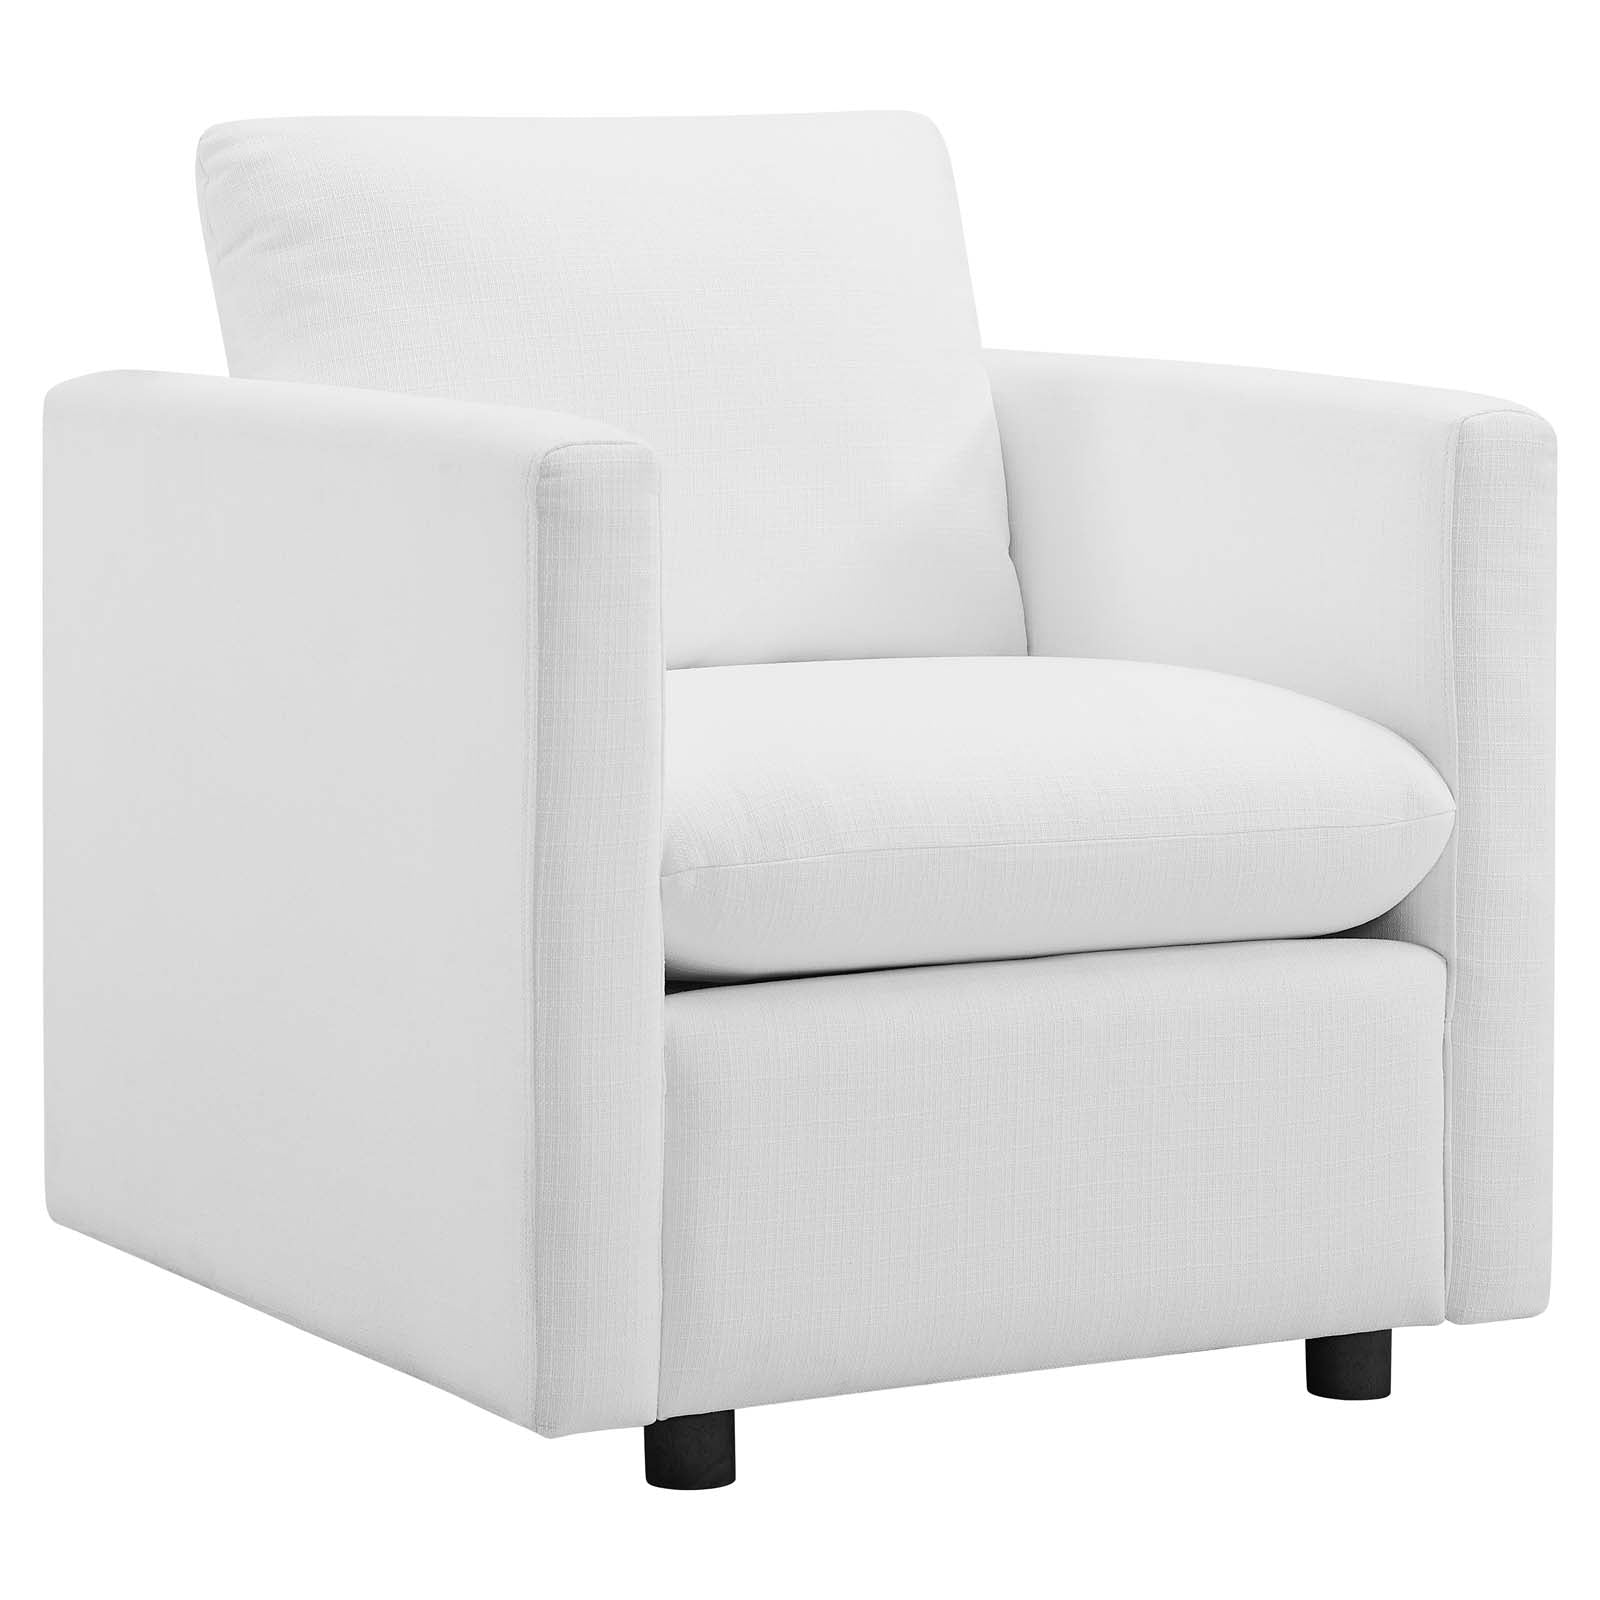 Modway Living Room Sets - Activate Upholstered Fabric Armchair ( Set Of 2 ) White